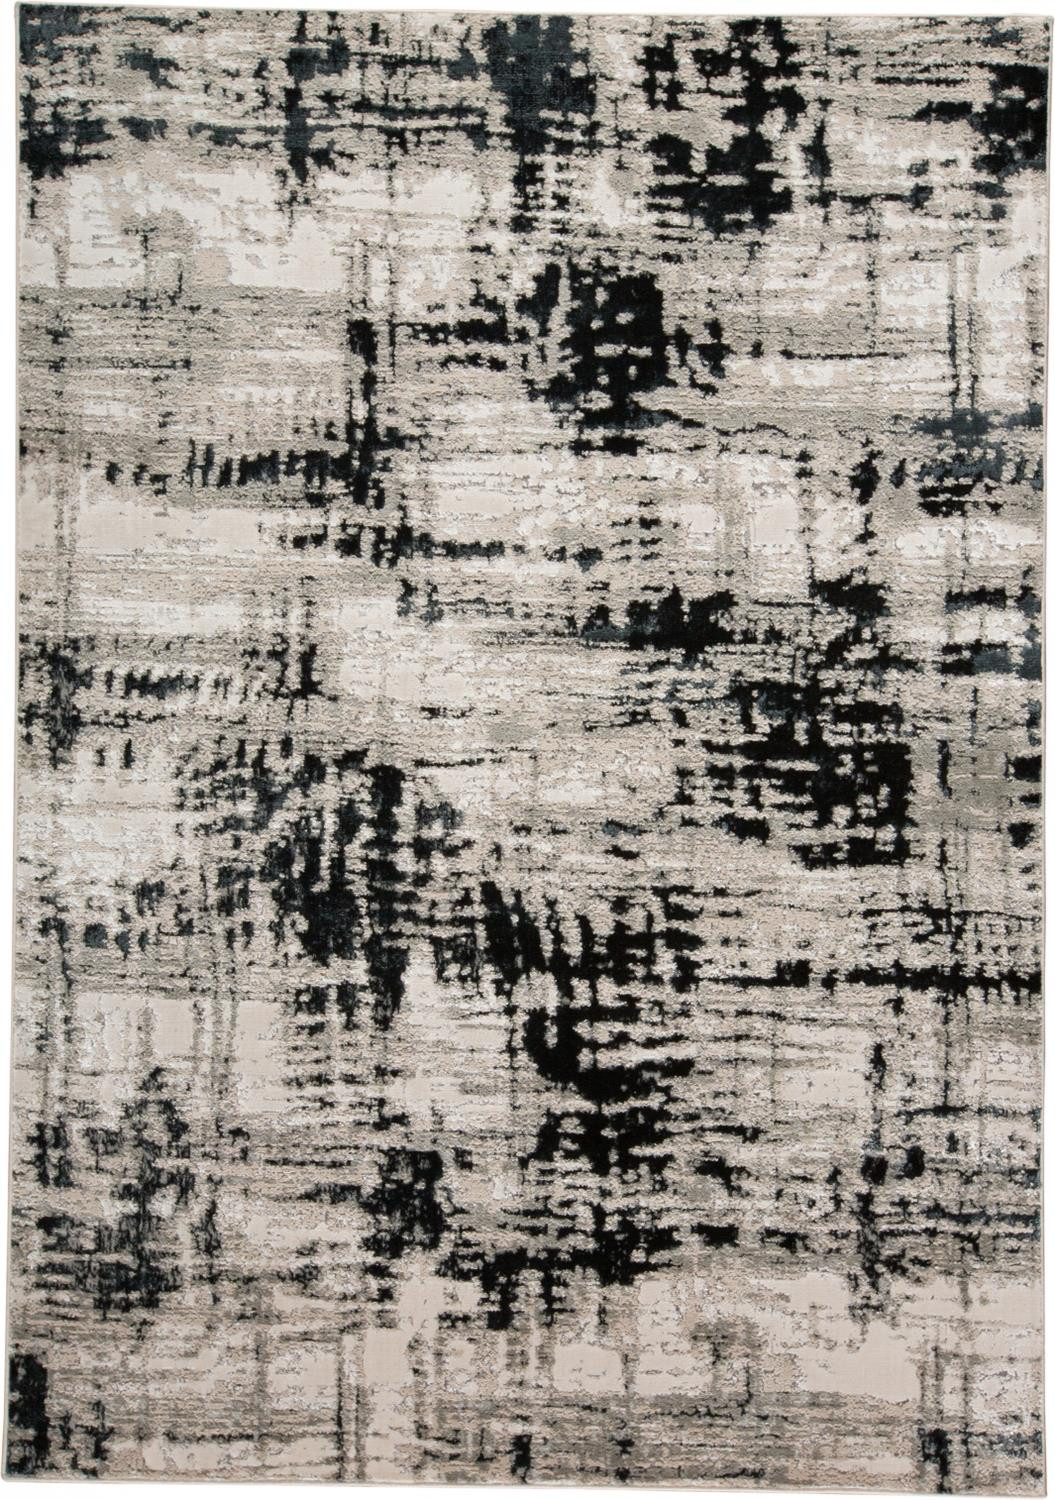 7' X 10' Black White And Gray Stain Resistant Area Rug-515295-1